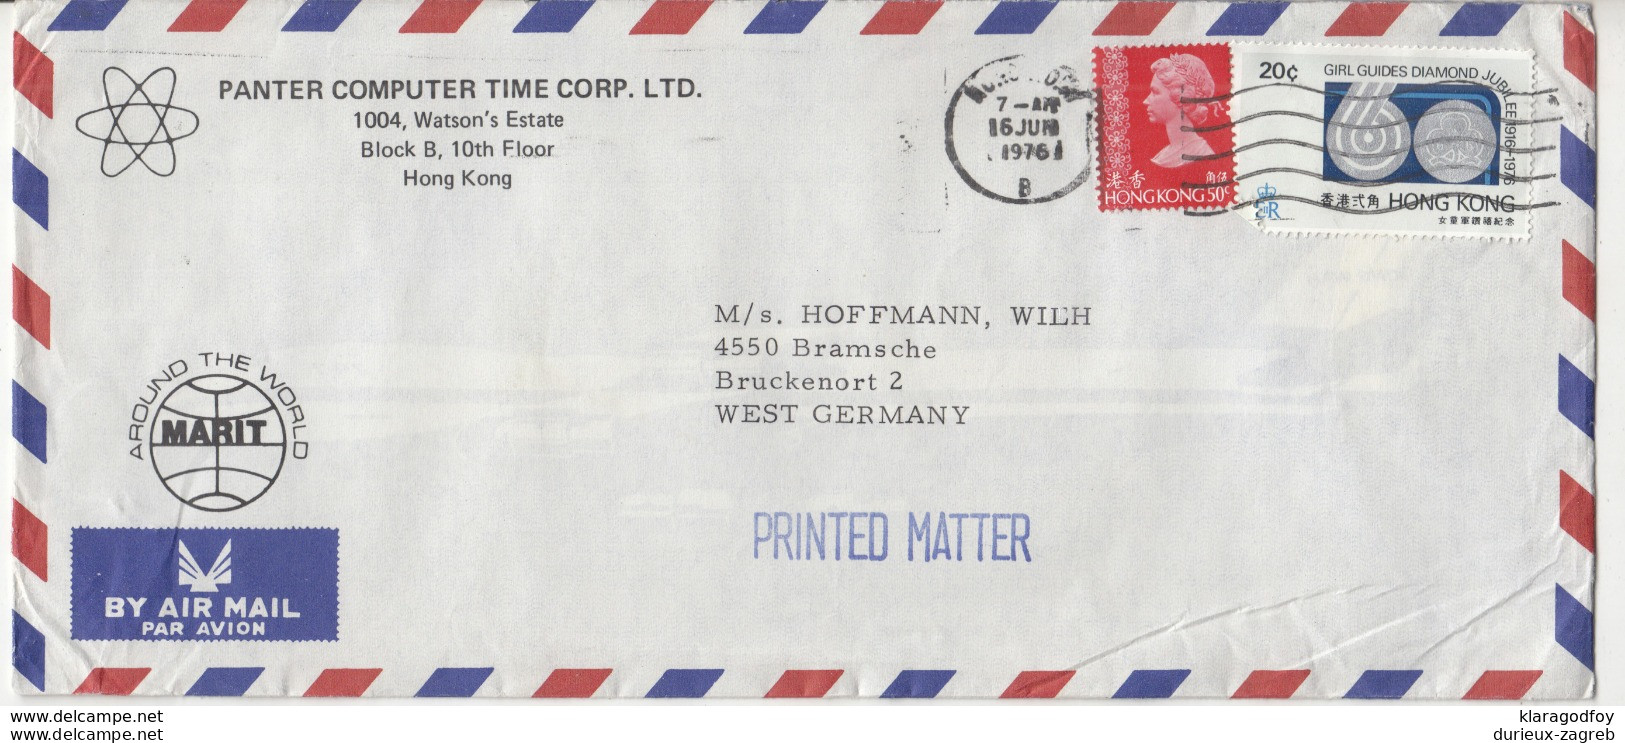 Panter Computer Time Corp. Company Air Mail Letter Cover Travelled 1976 To Germany B190922 - Cartas & Documentos